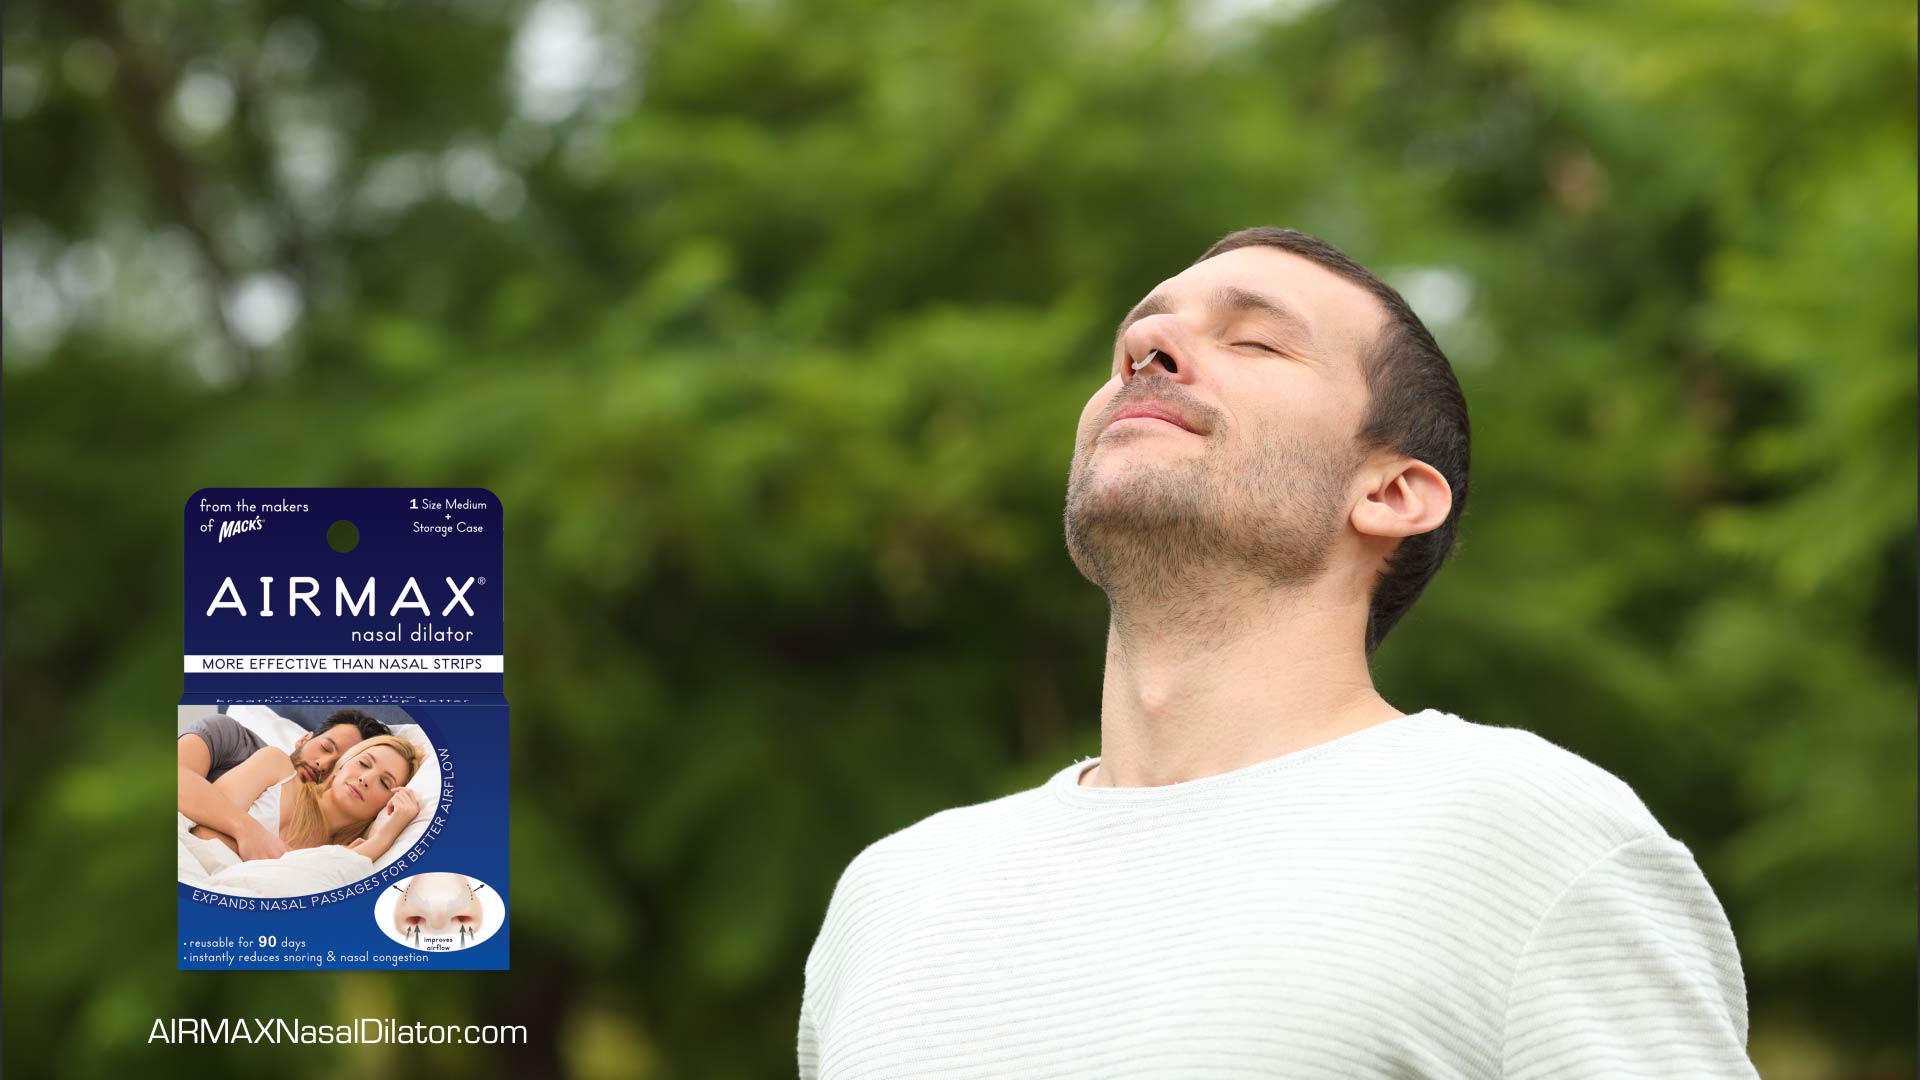 Better Breathing With The AIRMAX Nasal Dilator